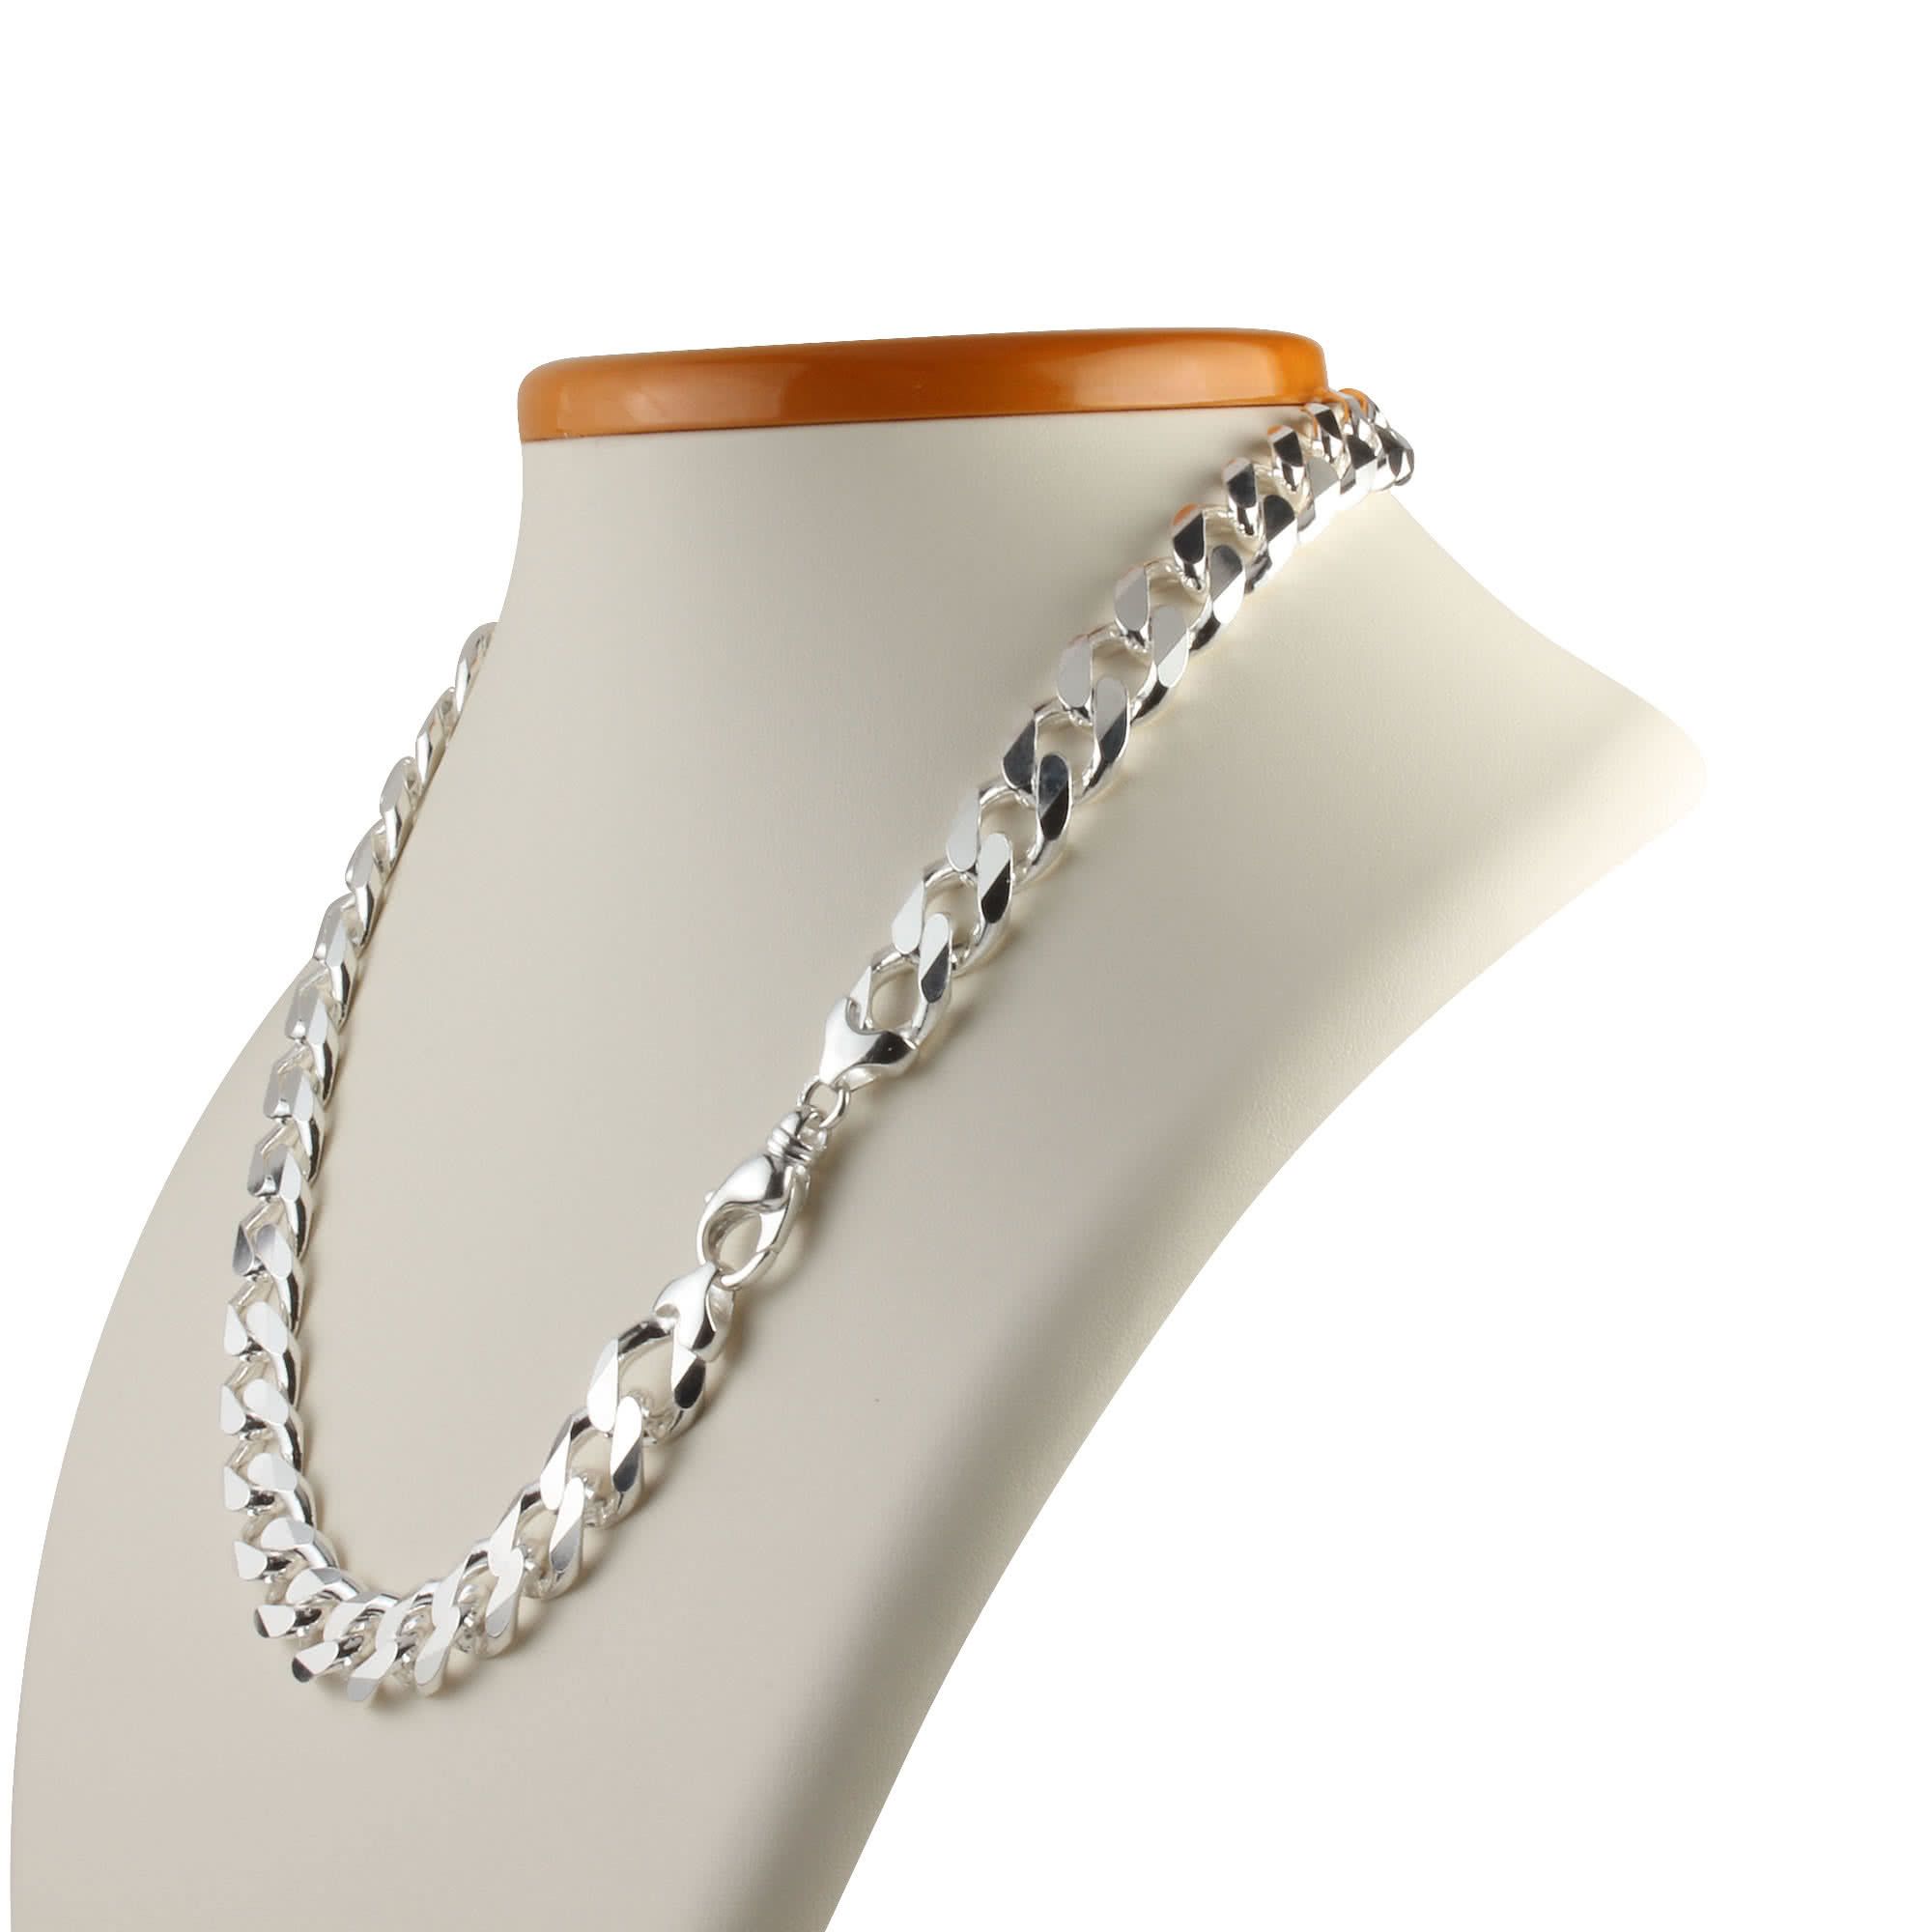 Heavy Wide Silver Curb Chain 13mm Width Throughout Most Up To Date Curb Chain Necklaces (View 25 of 25)